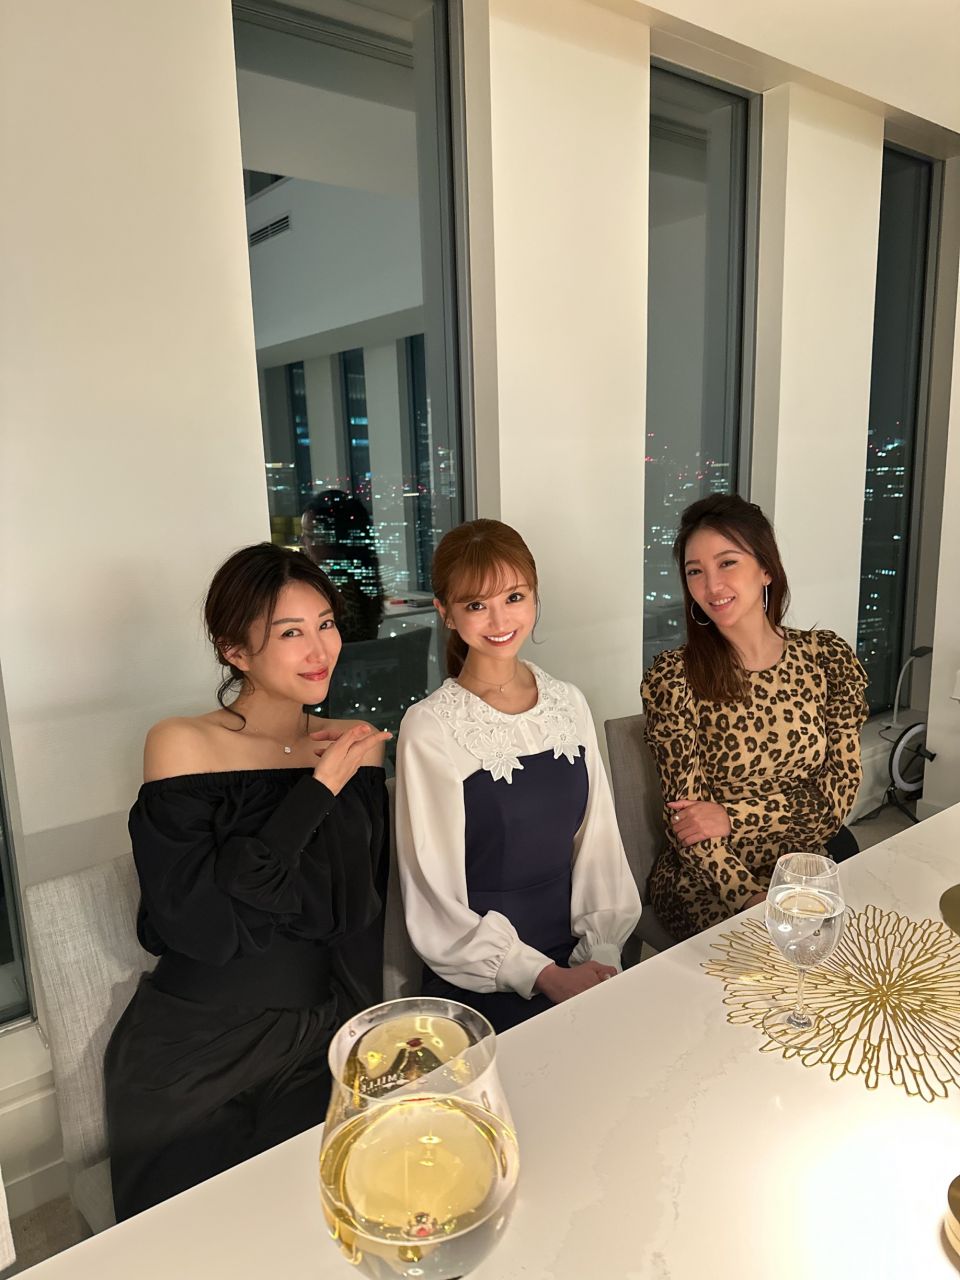 <a style="text-decoration:underline; color:#69F" href="https://aizawaemiri.com/blog/88892">まゆみさん♡ご自宅dinner</a>